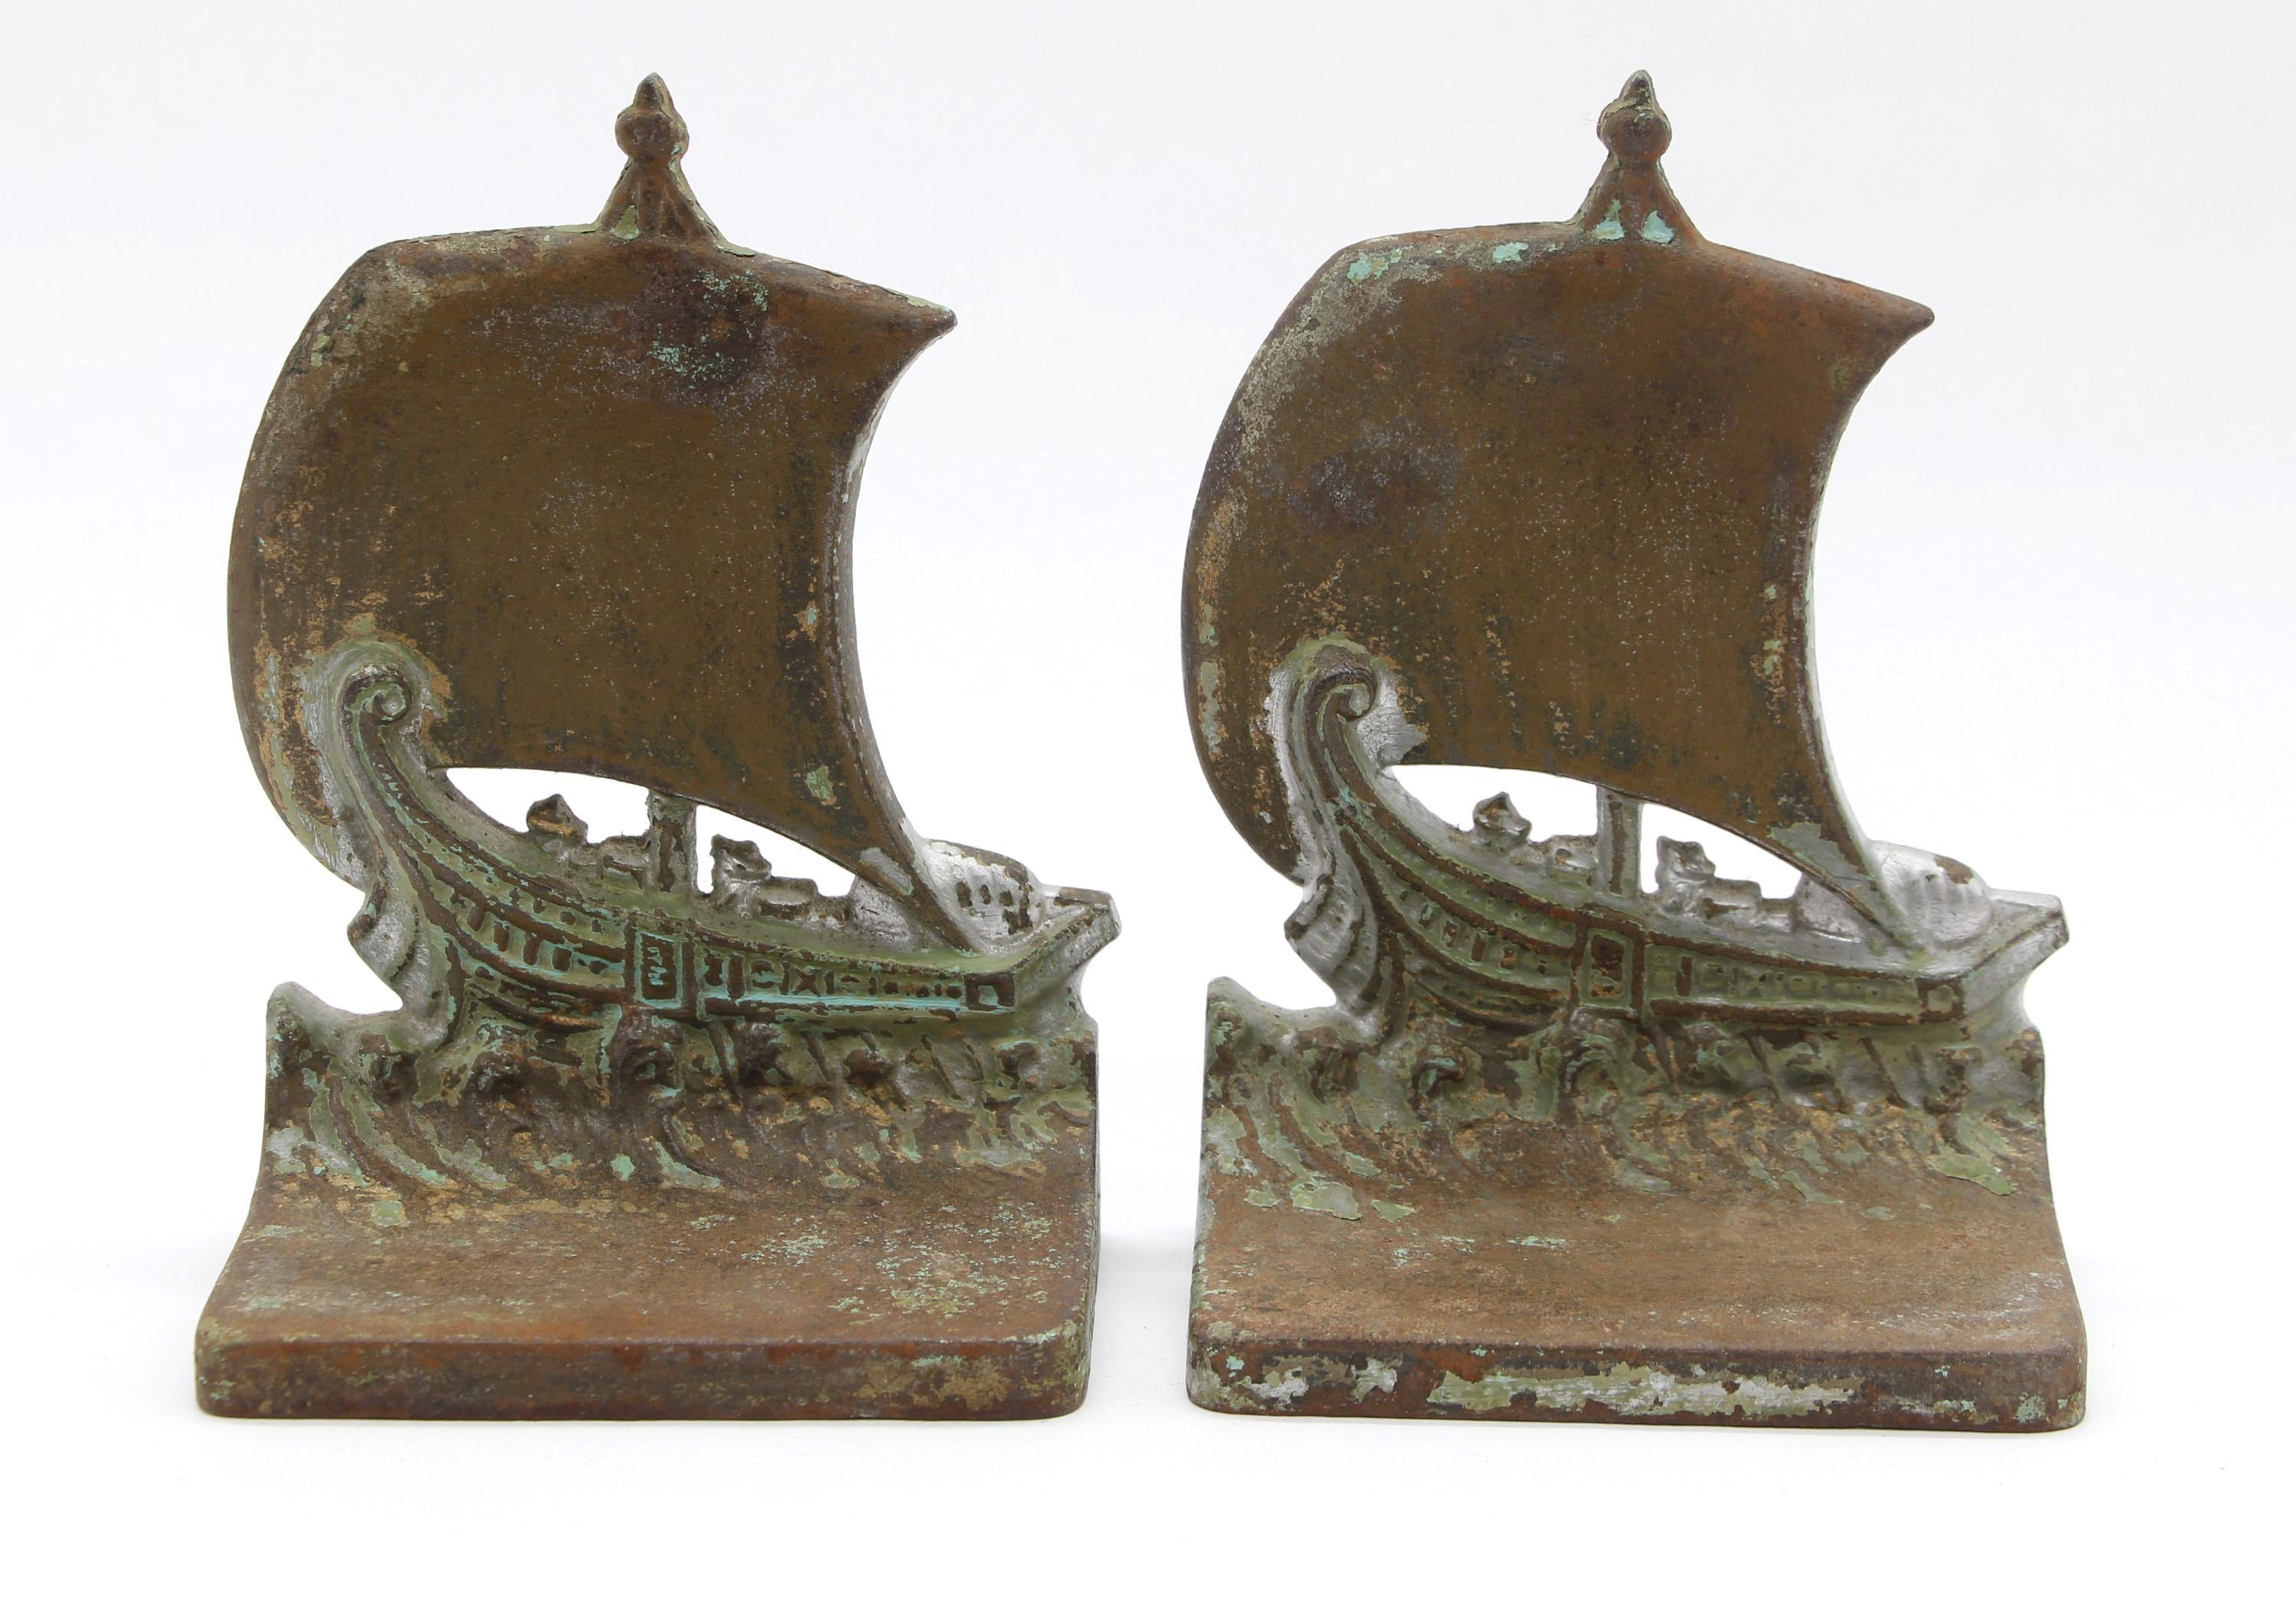 Early 1920s pair of majestic Viking ship bookends with a full sail ploughing ahead through open waters. Bi Bradley + Hubbard verified by a B+H seal on the bottom. Priced as a pair. This can be seen at our 400 Gilligan St location in Scranton, PA.